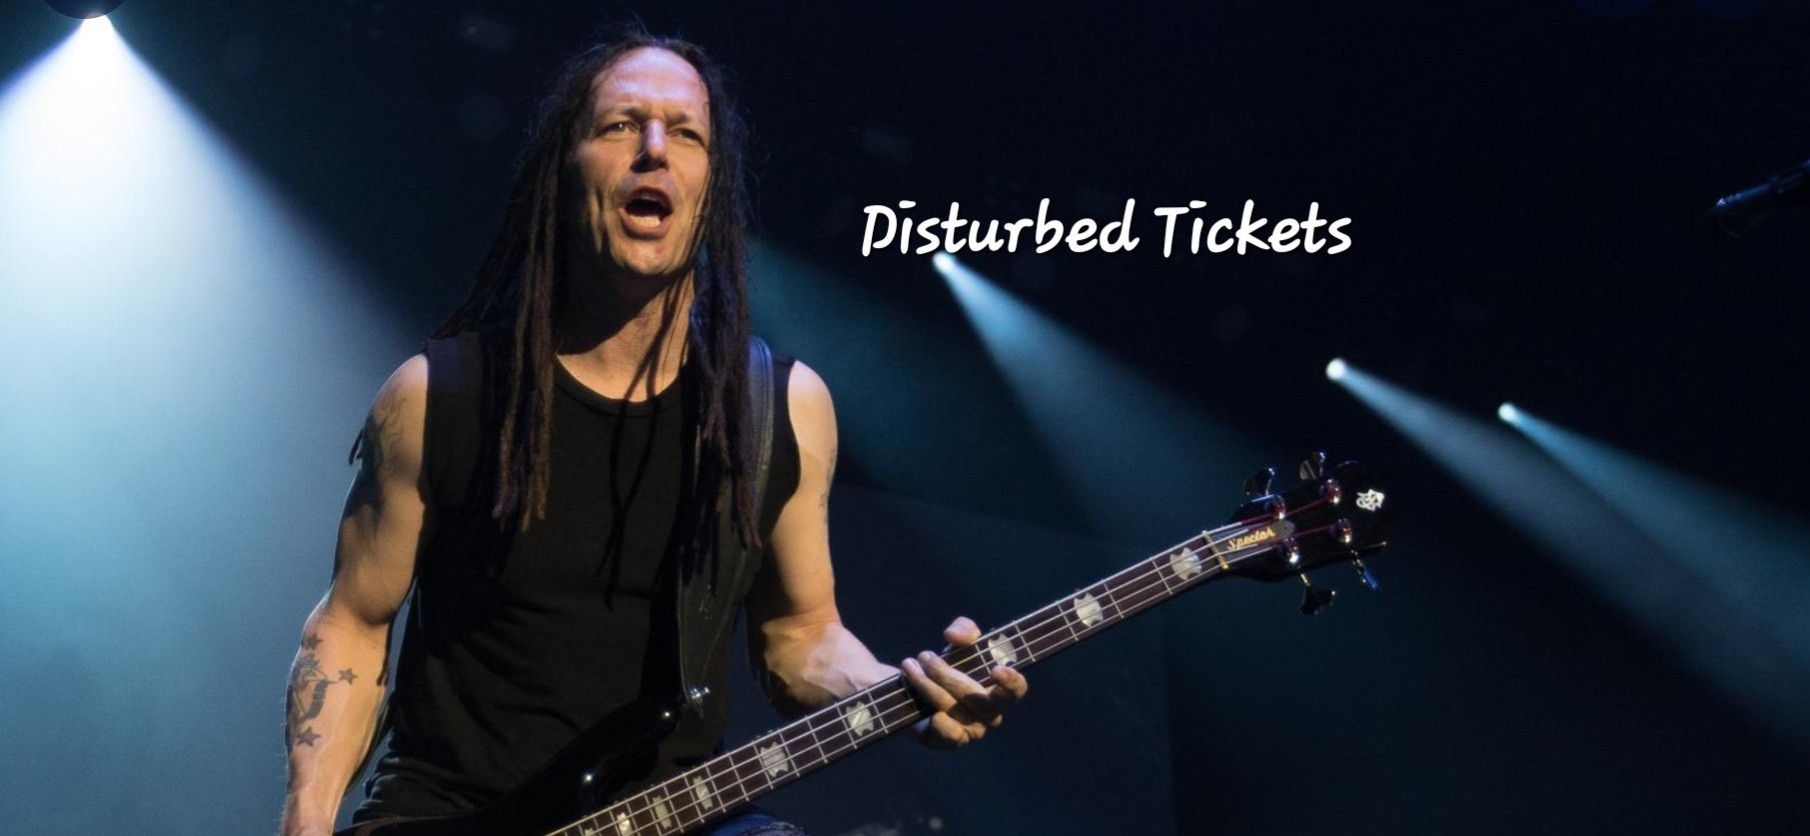 2 Tickets For The Disturbed Concert In Phoenix This Weekend.  